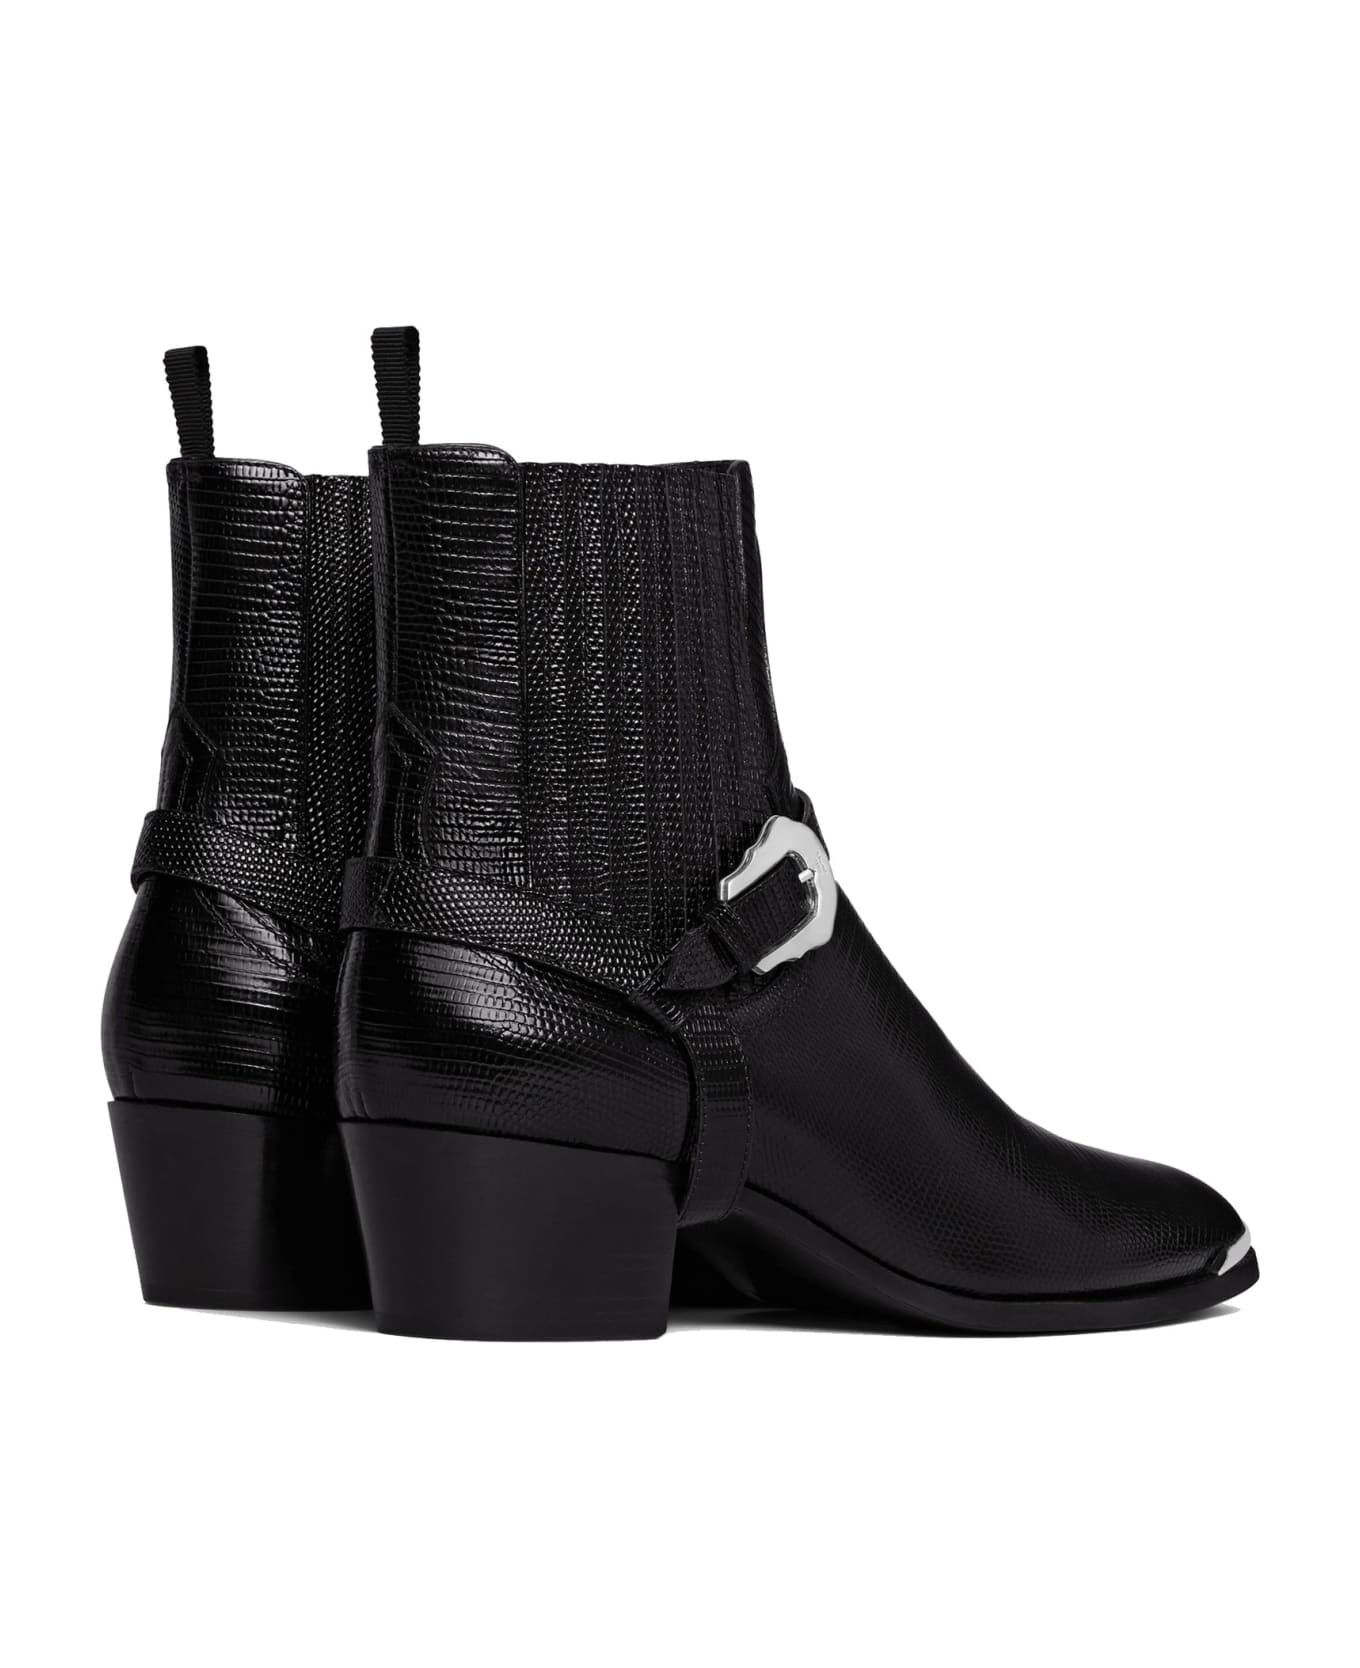 Celine Western Chelsea Isaac Harness Boots - Black ブーツ